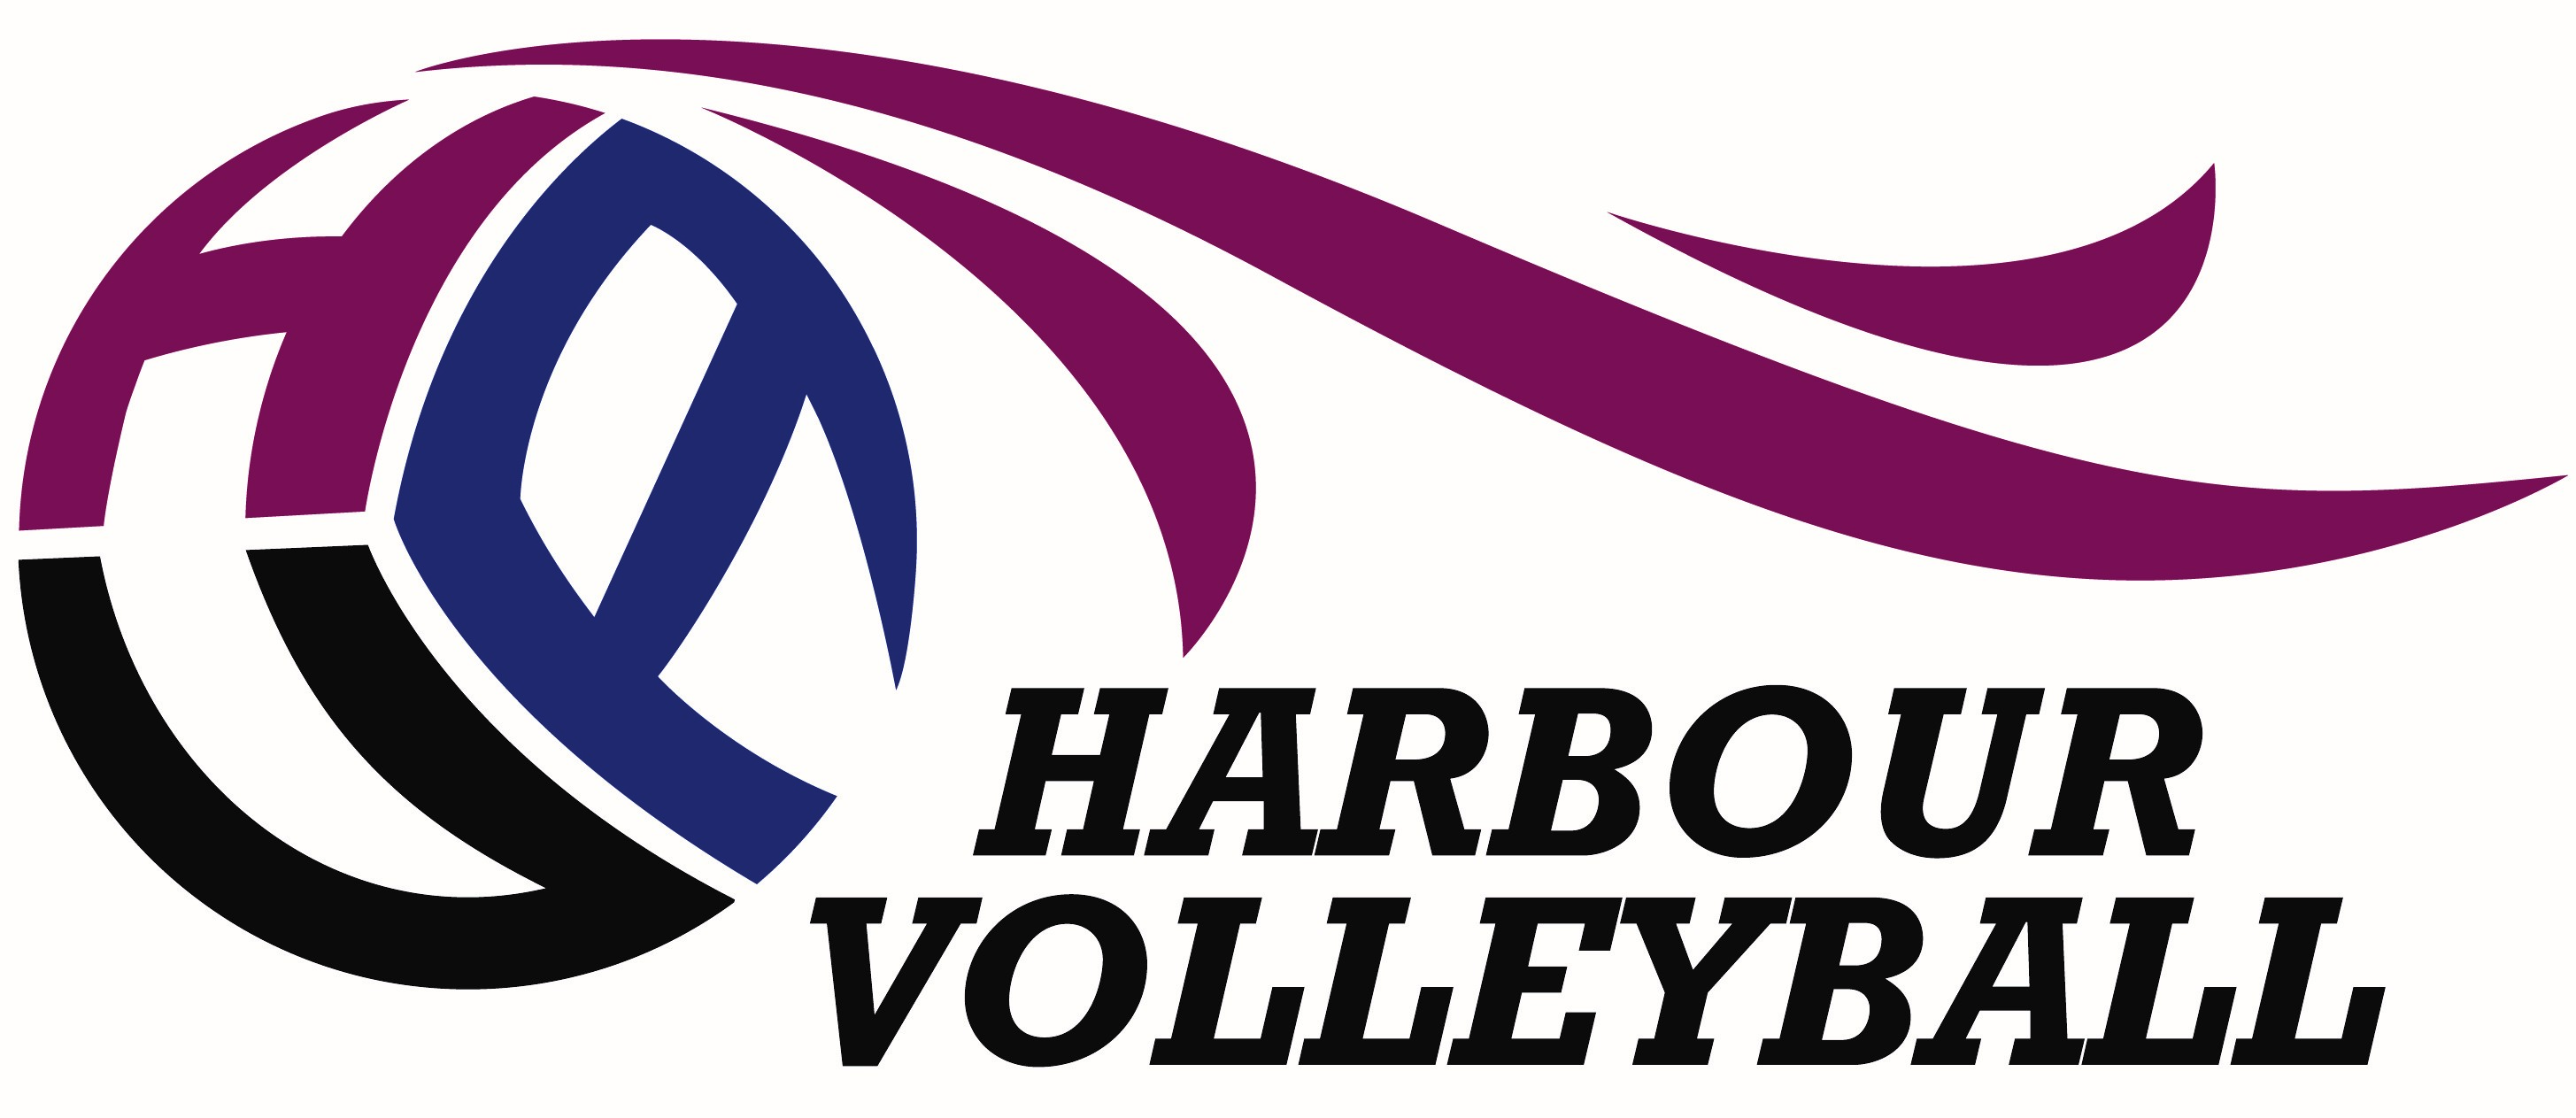 Harbour Volleyball Shop